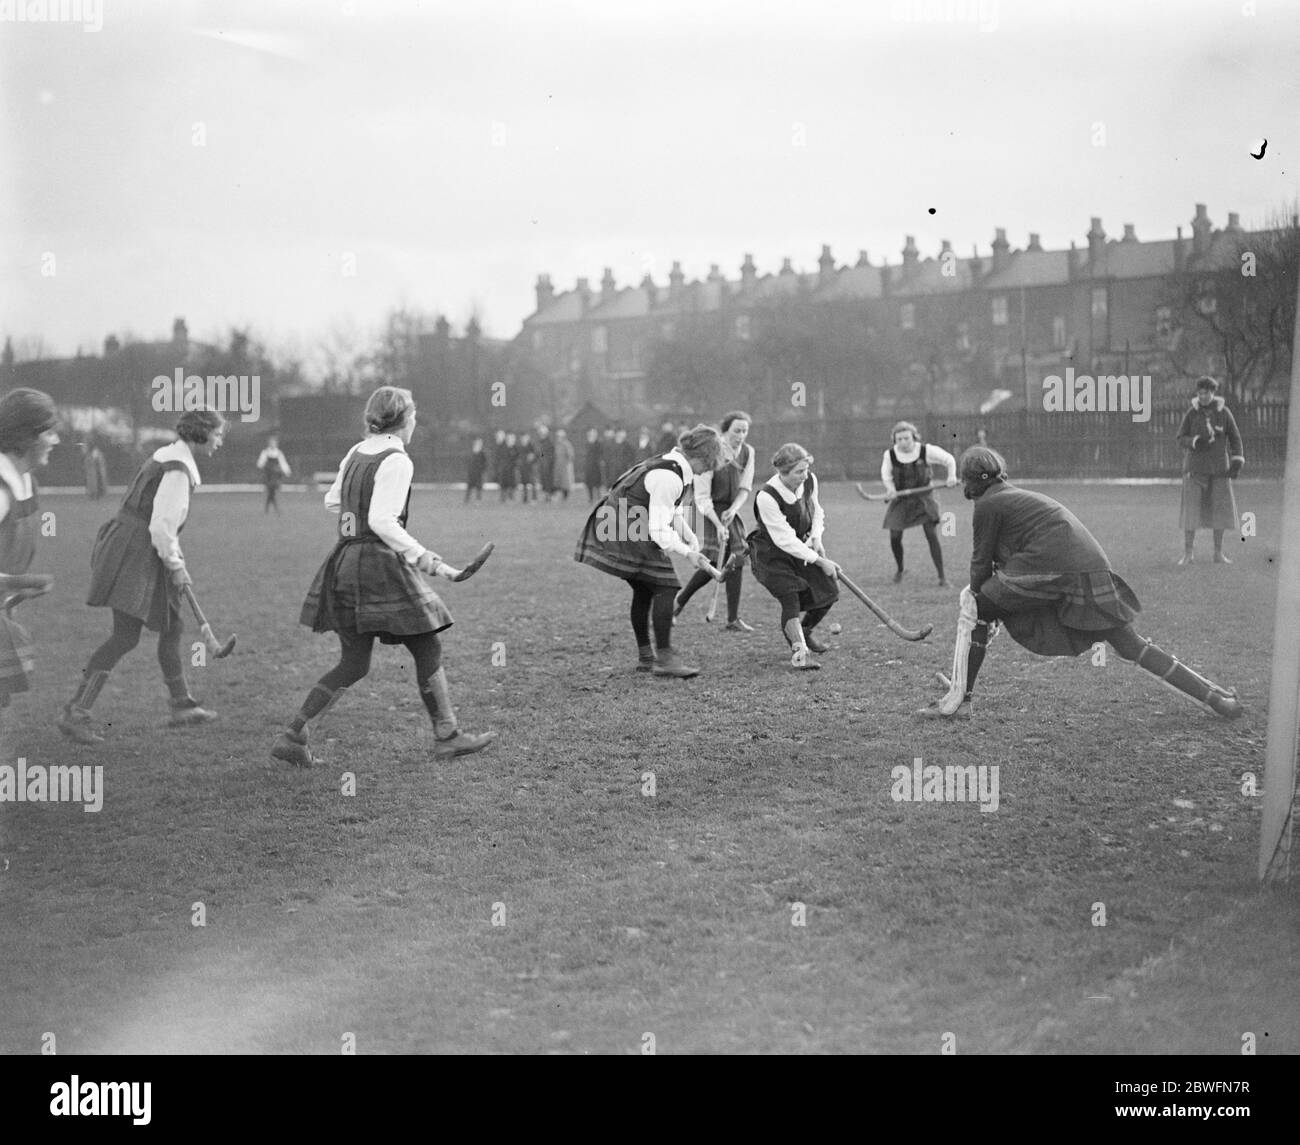 Ladies Hockey at Edmonton The King ' s College hockey team met the London School of Medicine at Edmonton in the semi final of the Inter College CupThe King ' s College goalie runs out and saves 16 February 1924 Stock Photo